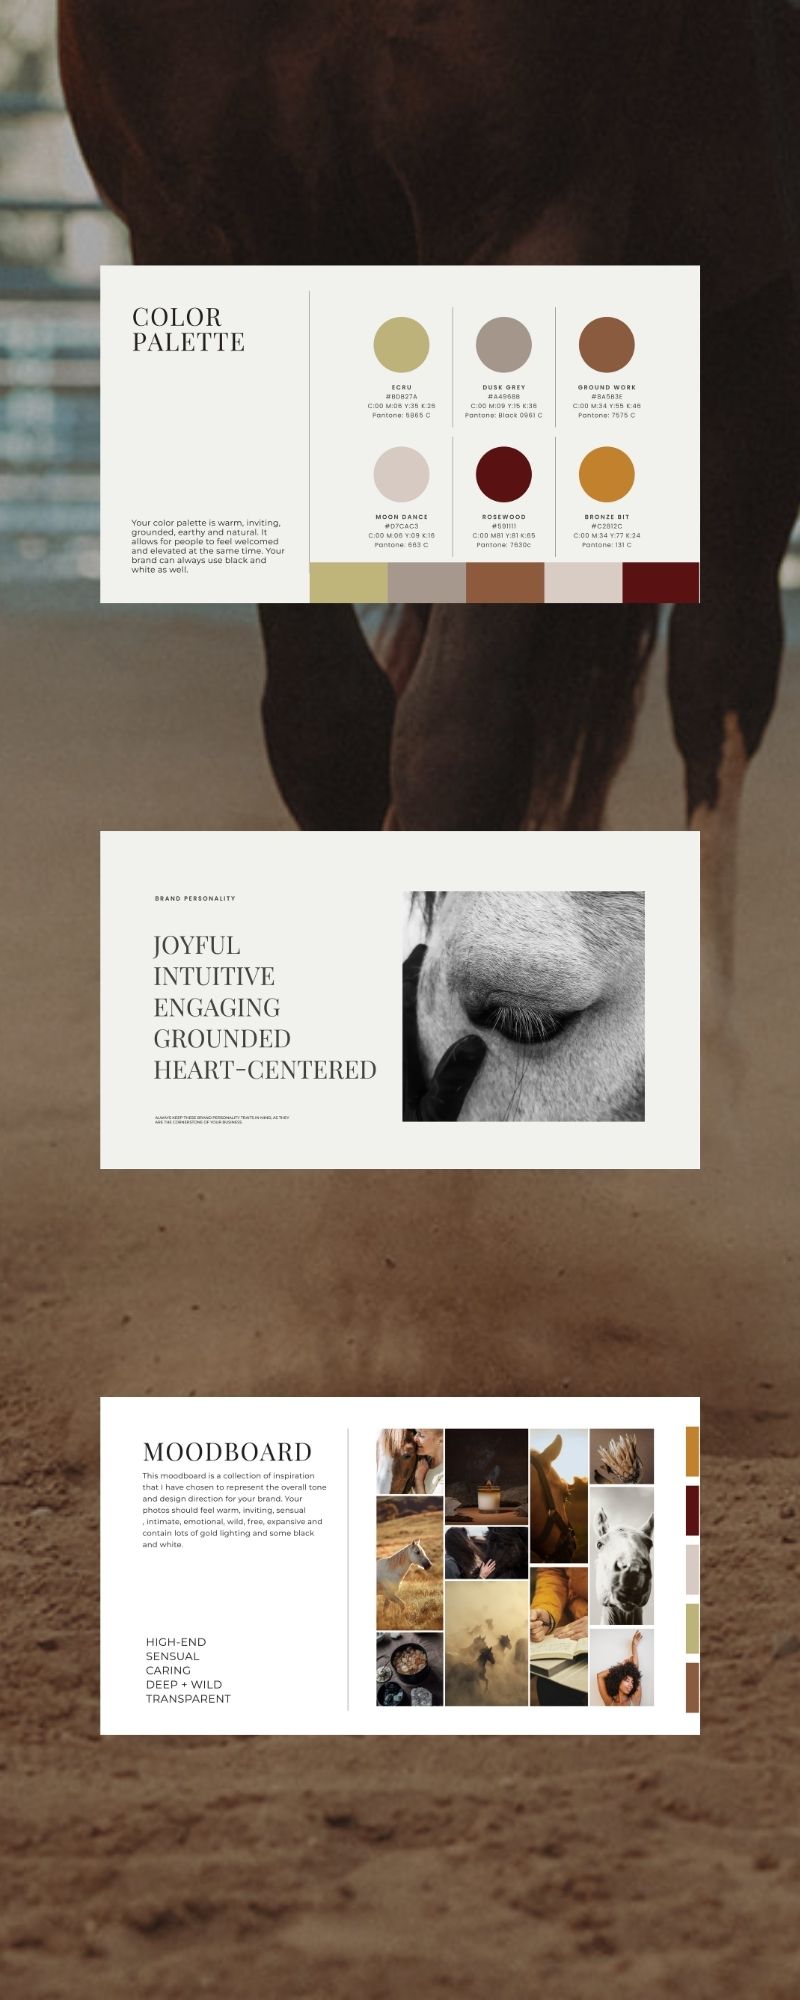 Mockup of brand guide pages for an intuitive horse education brand.